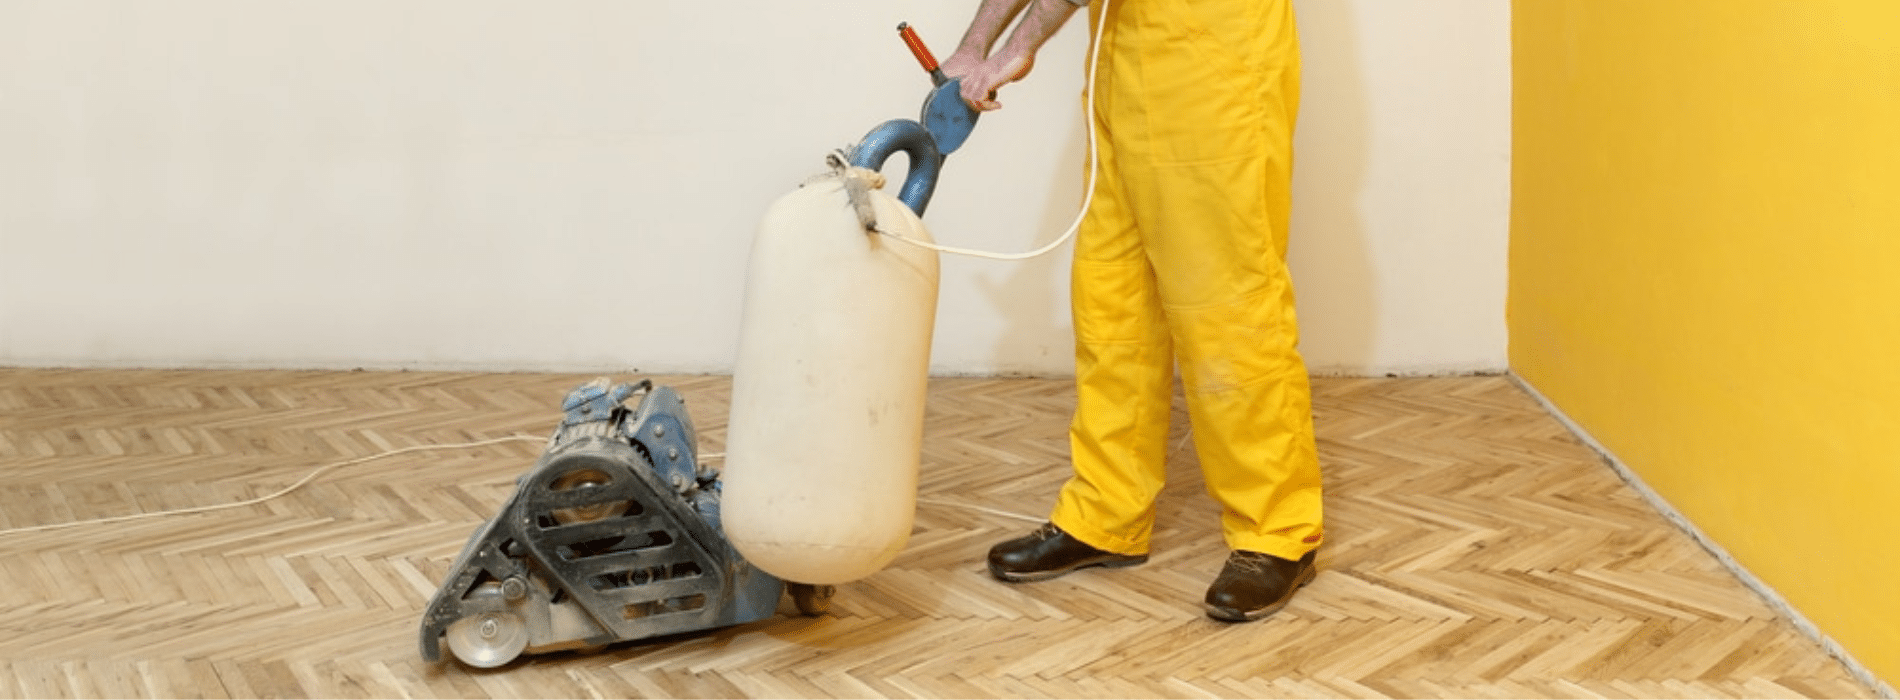 In Cuffley, EN6, Mr Sander® are using a Bona Belt (2.2 kW) to sand a herringbone floor. The belt sander (250x750 mm) operates at 230 V and 50/60 Hz. It is connected to a dust extraction system with a HEPA filter, ensuring a clean and efficient outcome.